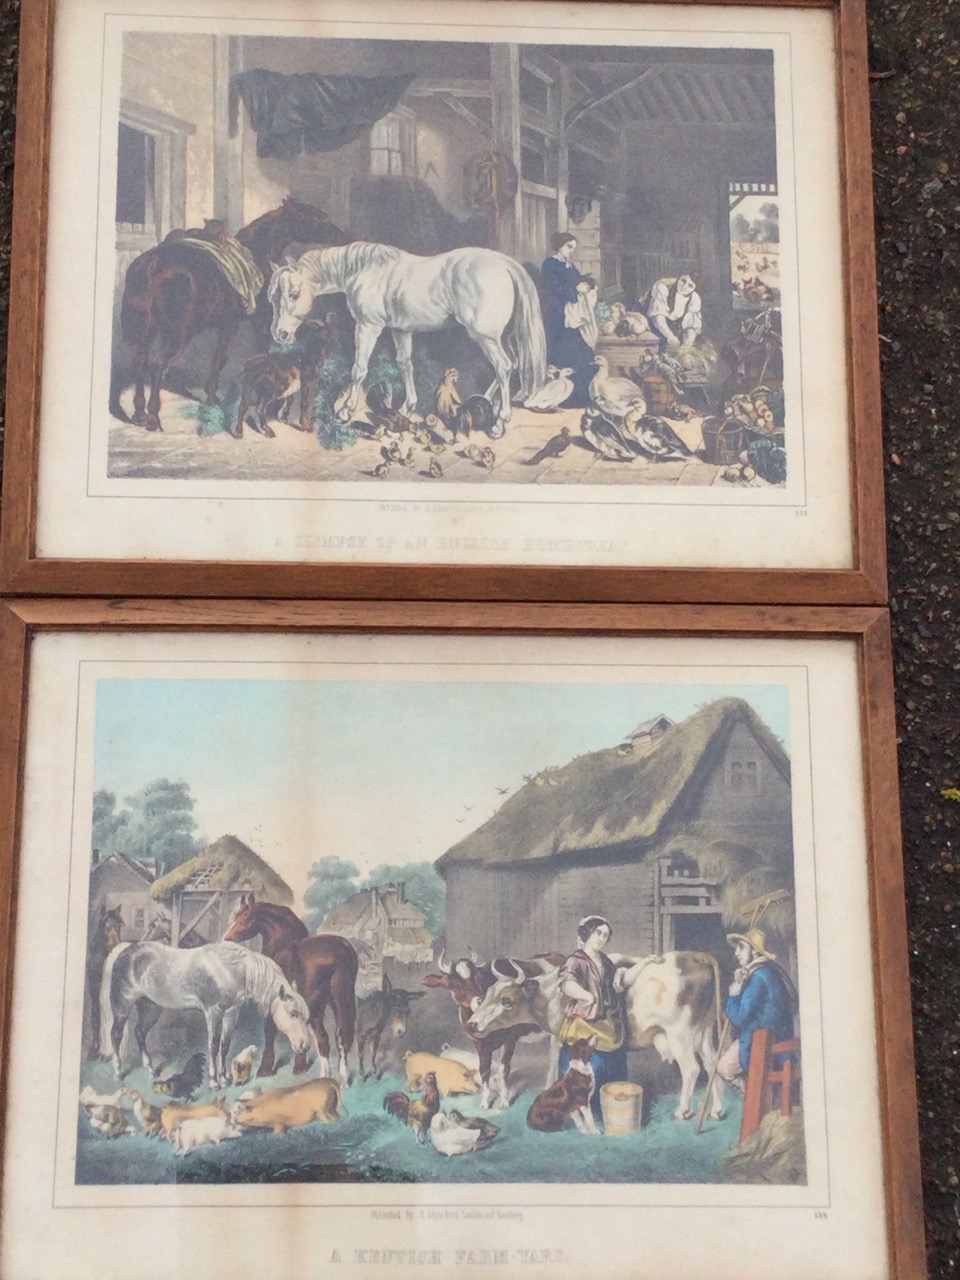 A pair of oak framed rural prints published by Lipschitz titled A Kentish Farmyard & A Glimpse of an - Image 2 of 3